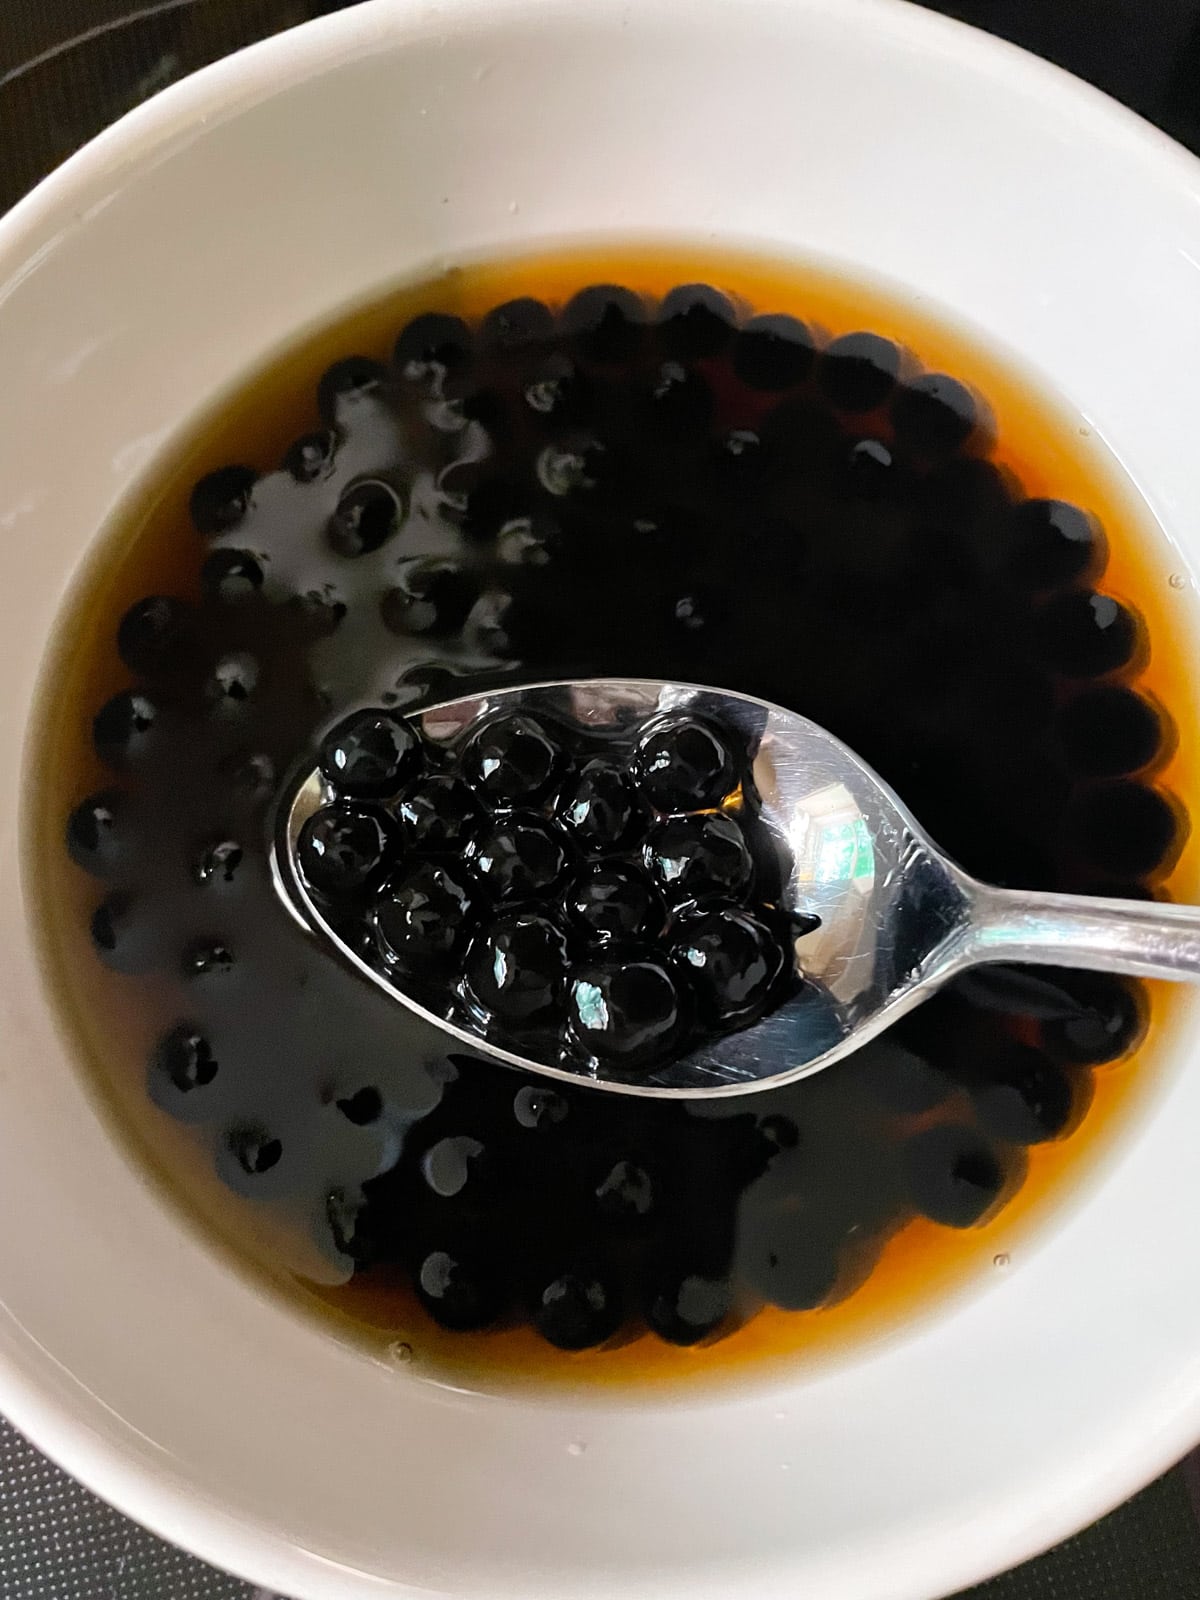 soak in simple syrup